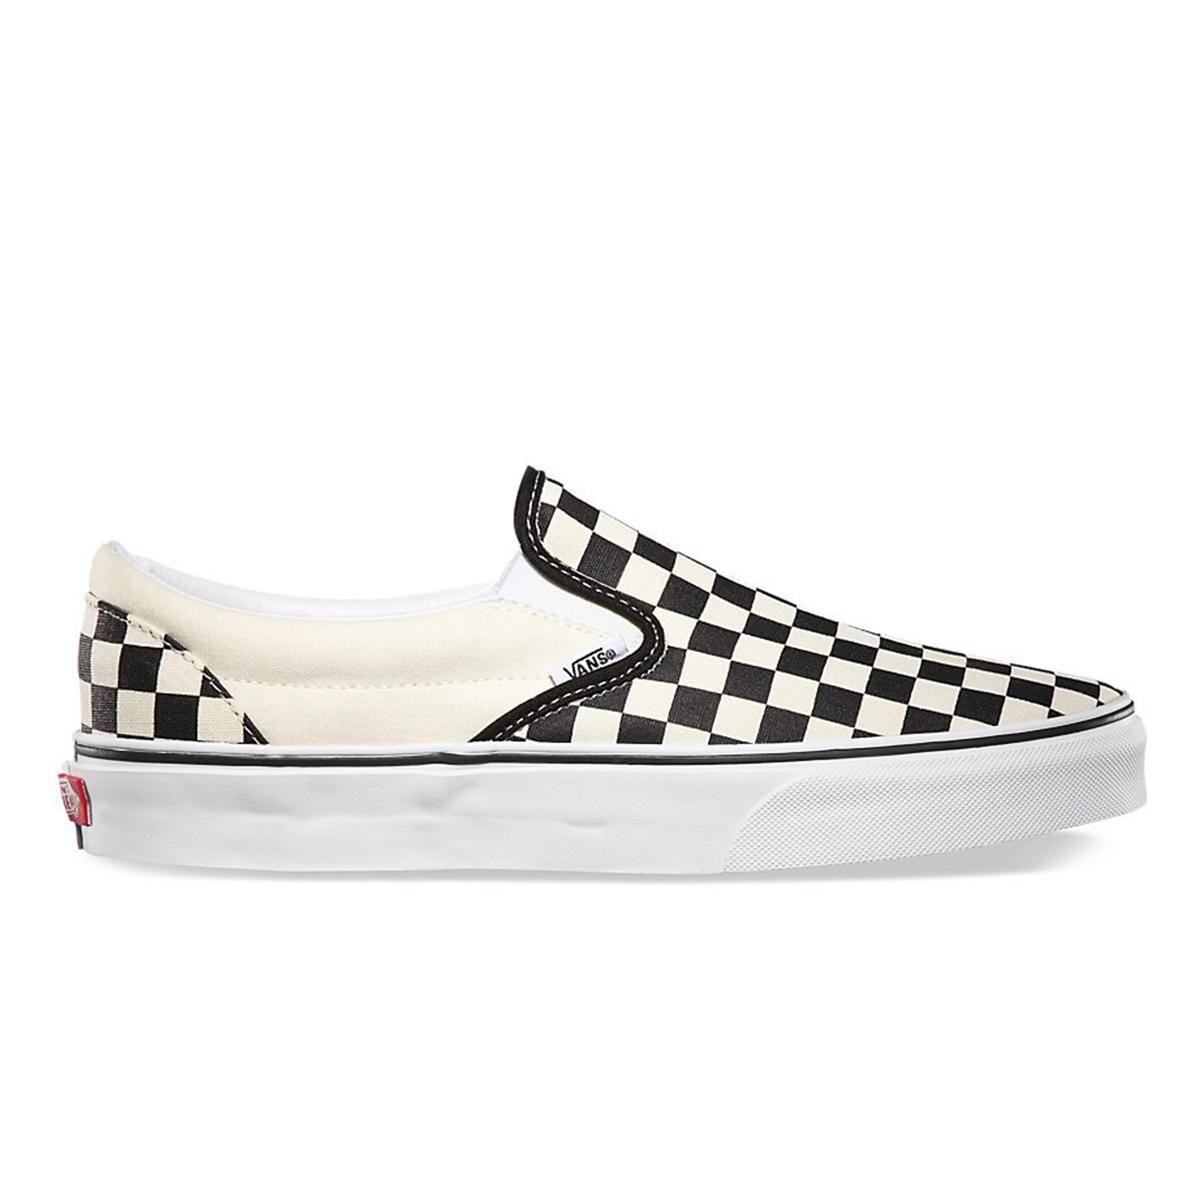 VANS Slip On shoes checkerboard without shoe laces